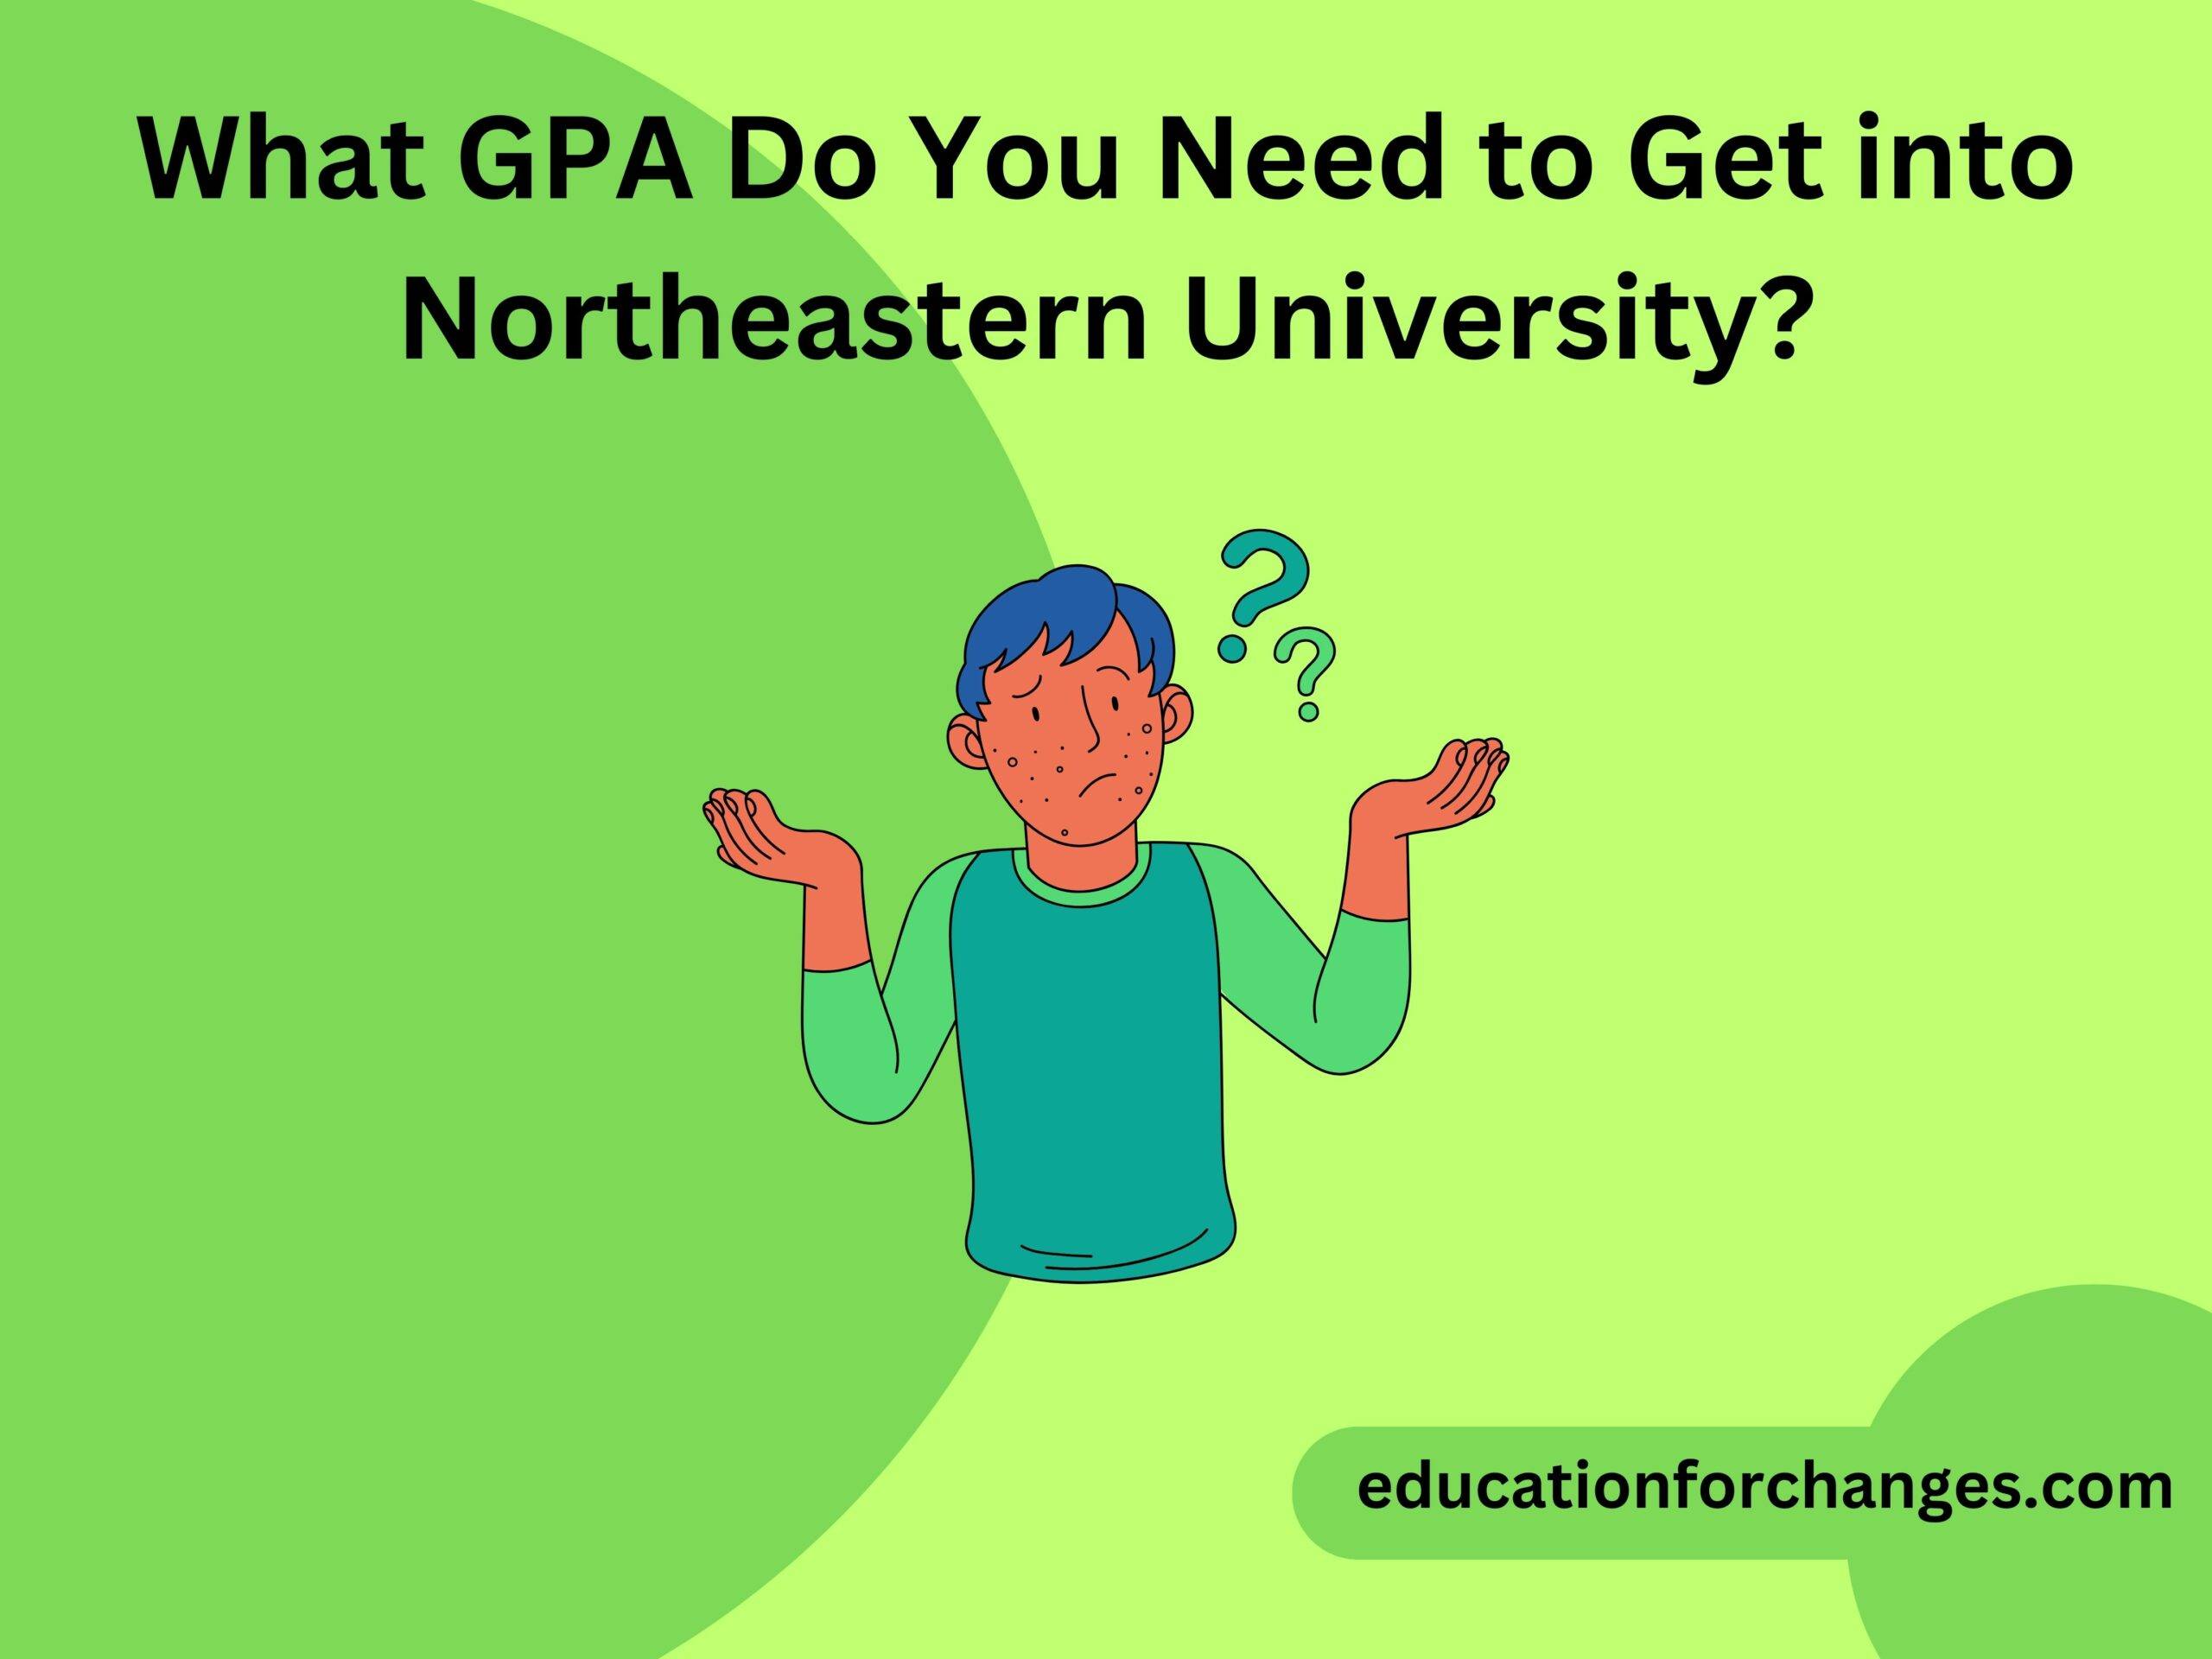 What GPA Do You Need to Get into Northeastern University